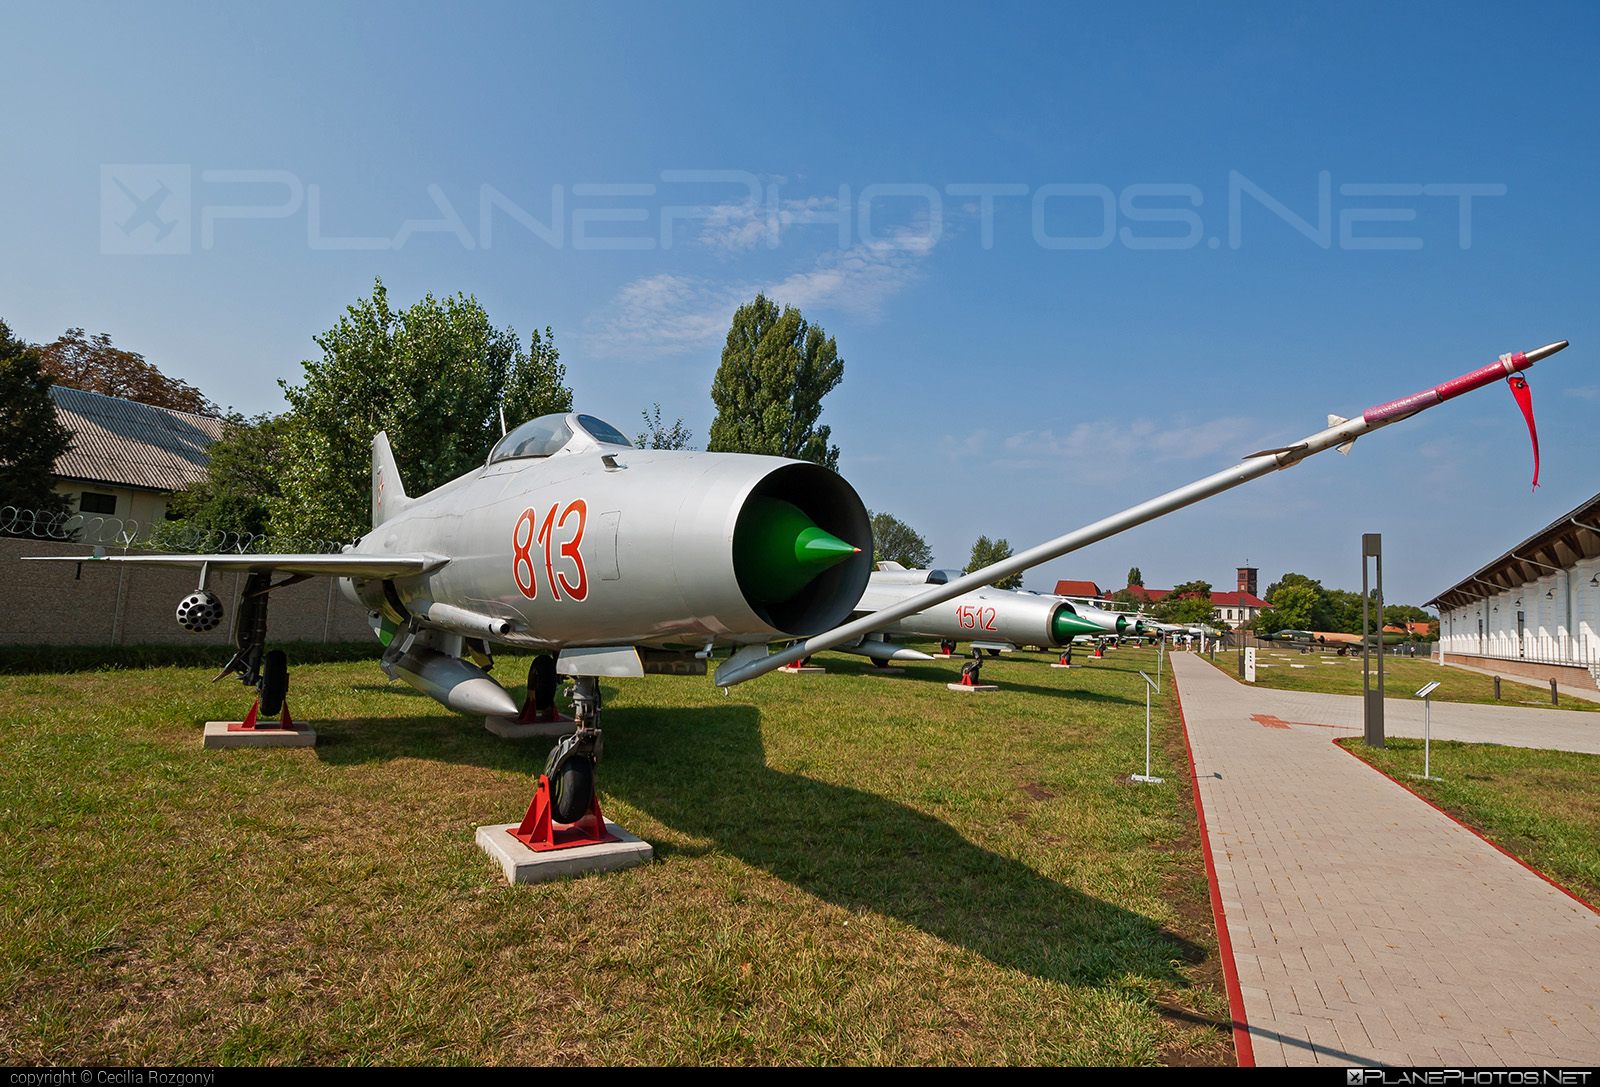 Mikoyan-Gurevich MiG-21F-13 - 813 operated by Magyar Néphadsereg (Hungarian People's Army) #hungarianpeoplesarmy #magyarnephadsereg #mig #mig21 #mig21f13 #mikoyangurevich